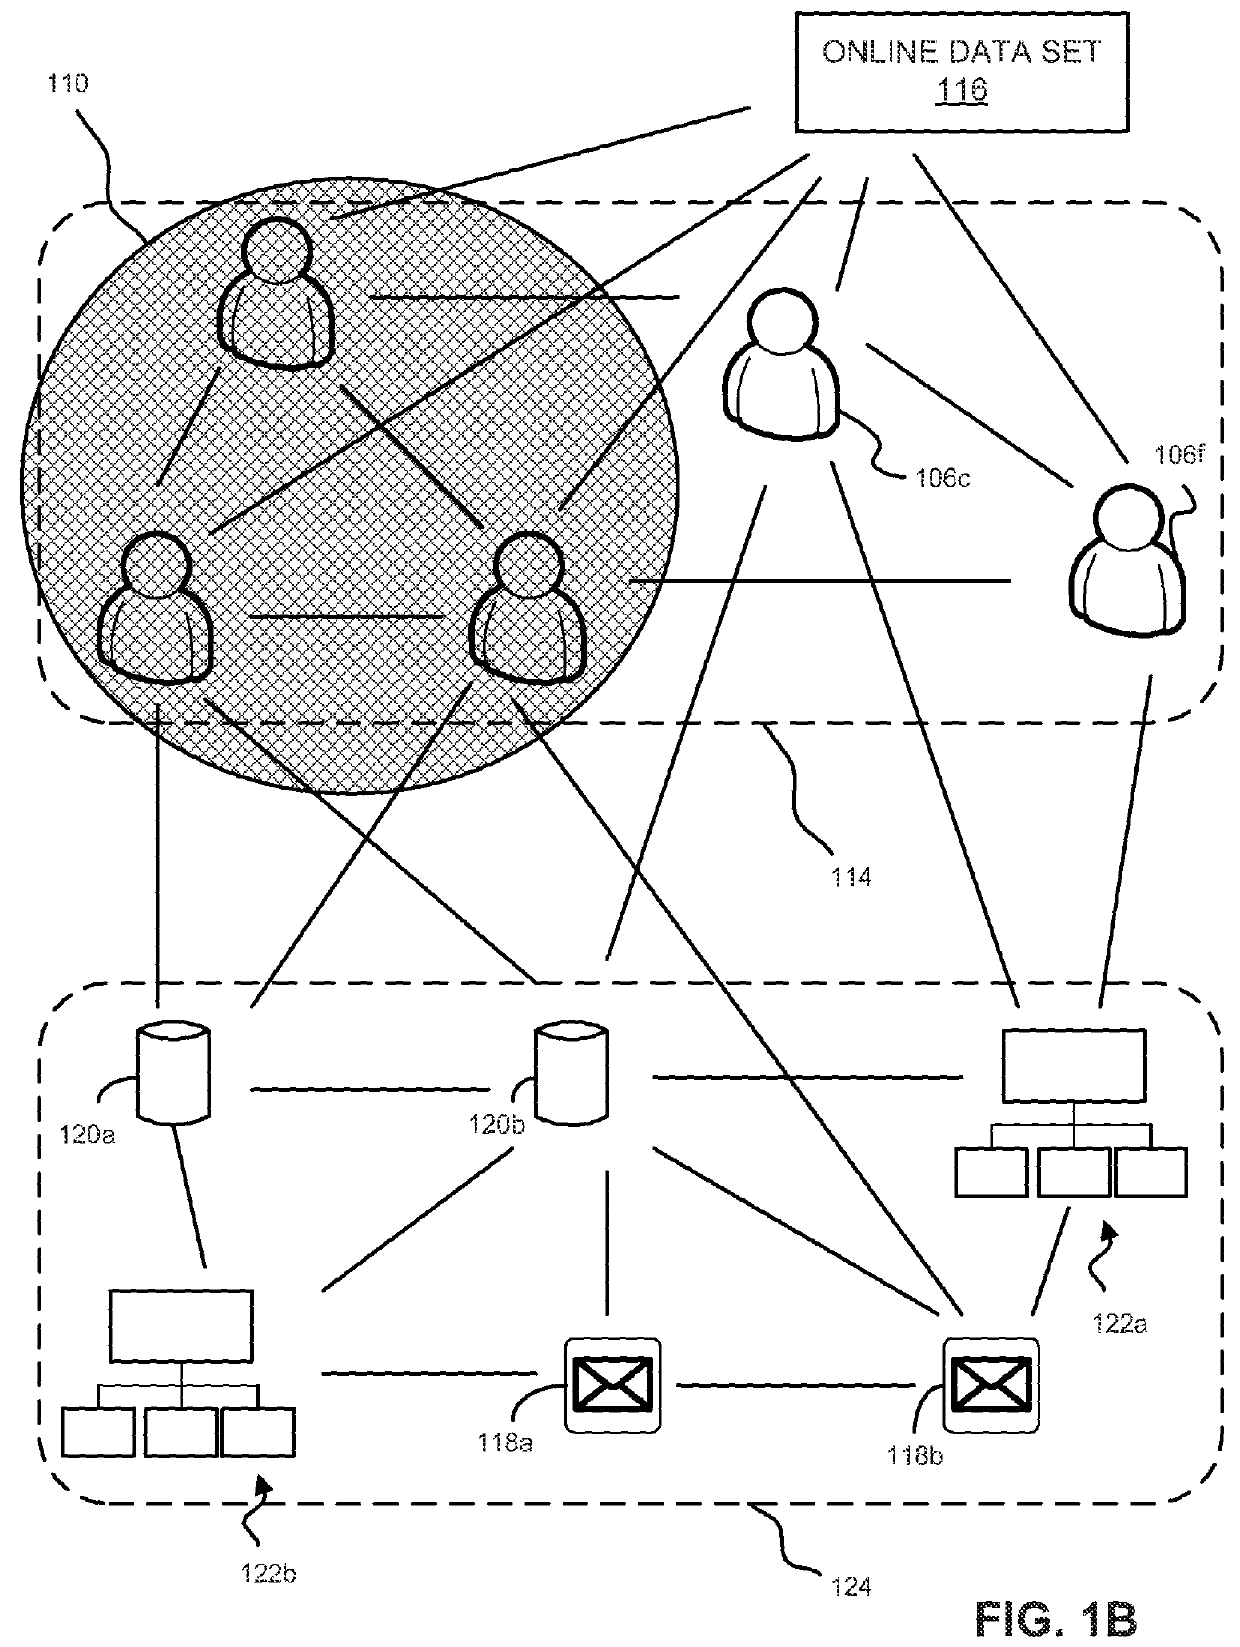 Method and system for thwarting insider attacks through informational network analysis